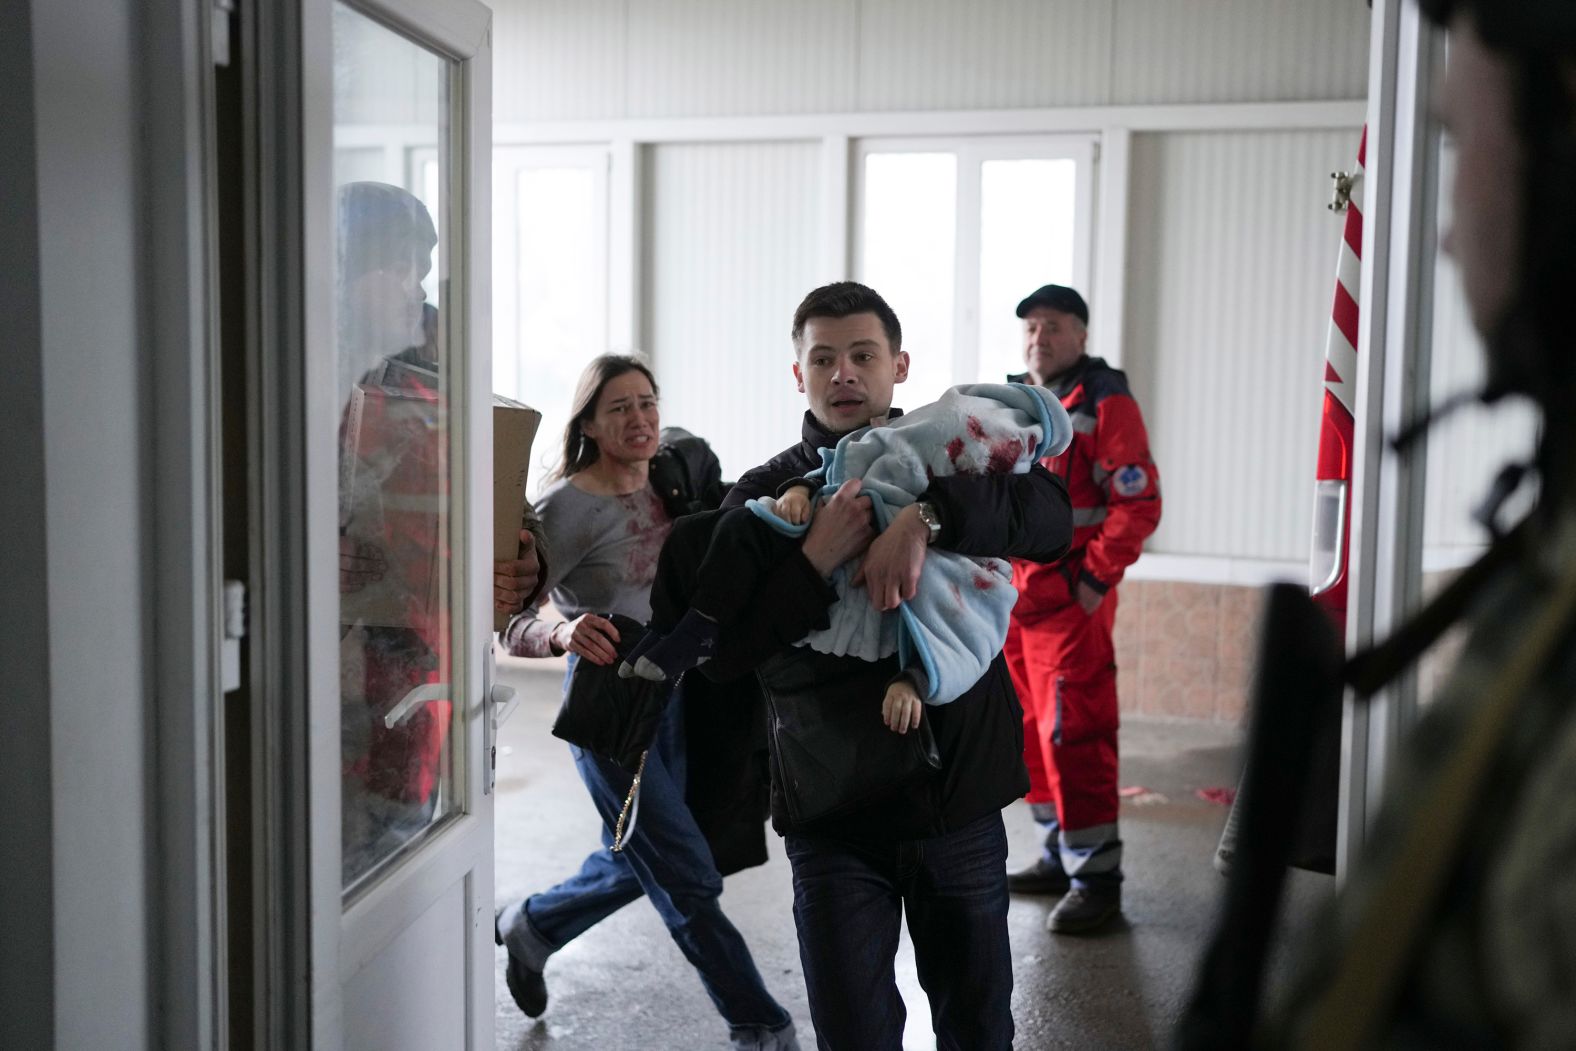 Marina Yatsko runs behind her boyfriend, Fedor, as they arrive at the hospital with her <a href="index.php?page=&url=https%3A%2F%2Fwww.cnn.com%2Feurope%2Flive-news%2Fukraine-russia-putin-news-03-05-22%2Fh_c7b21aabcd03d680d3467e41057b5a86" target="_blank">18-month-old son, Kirill,</a> who was wounded by shelling in Mariupol on March 4. Medical workers frantically tried to save the boy's life, but he didn't survive.